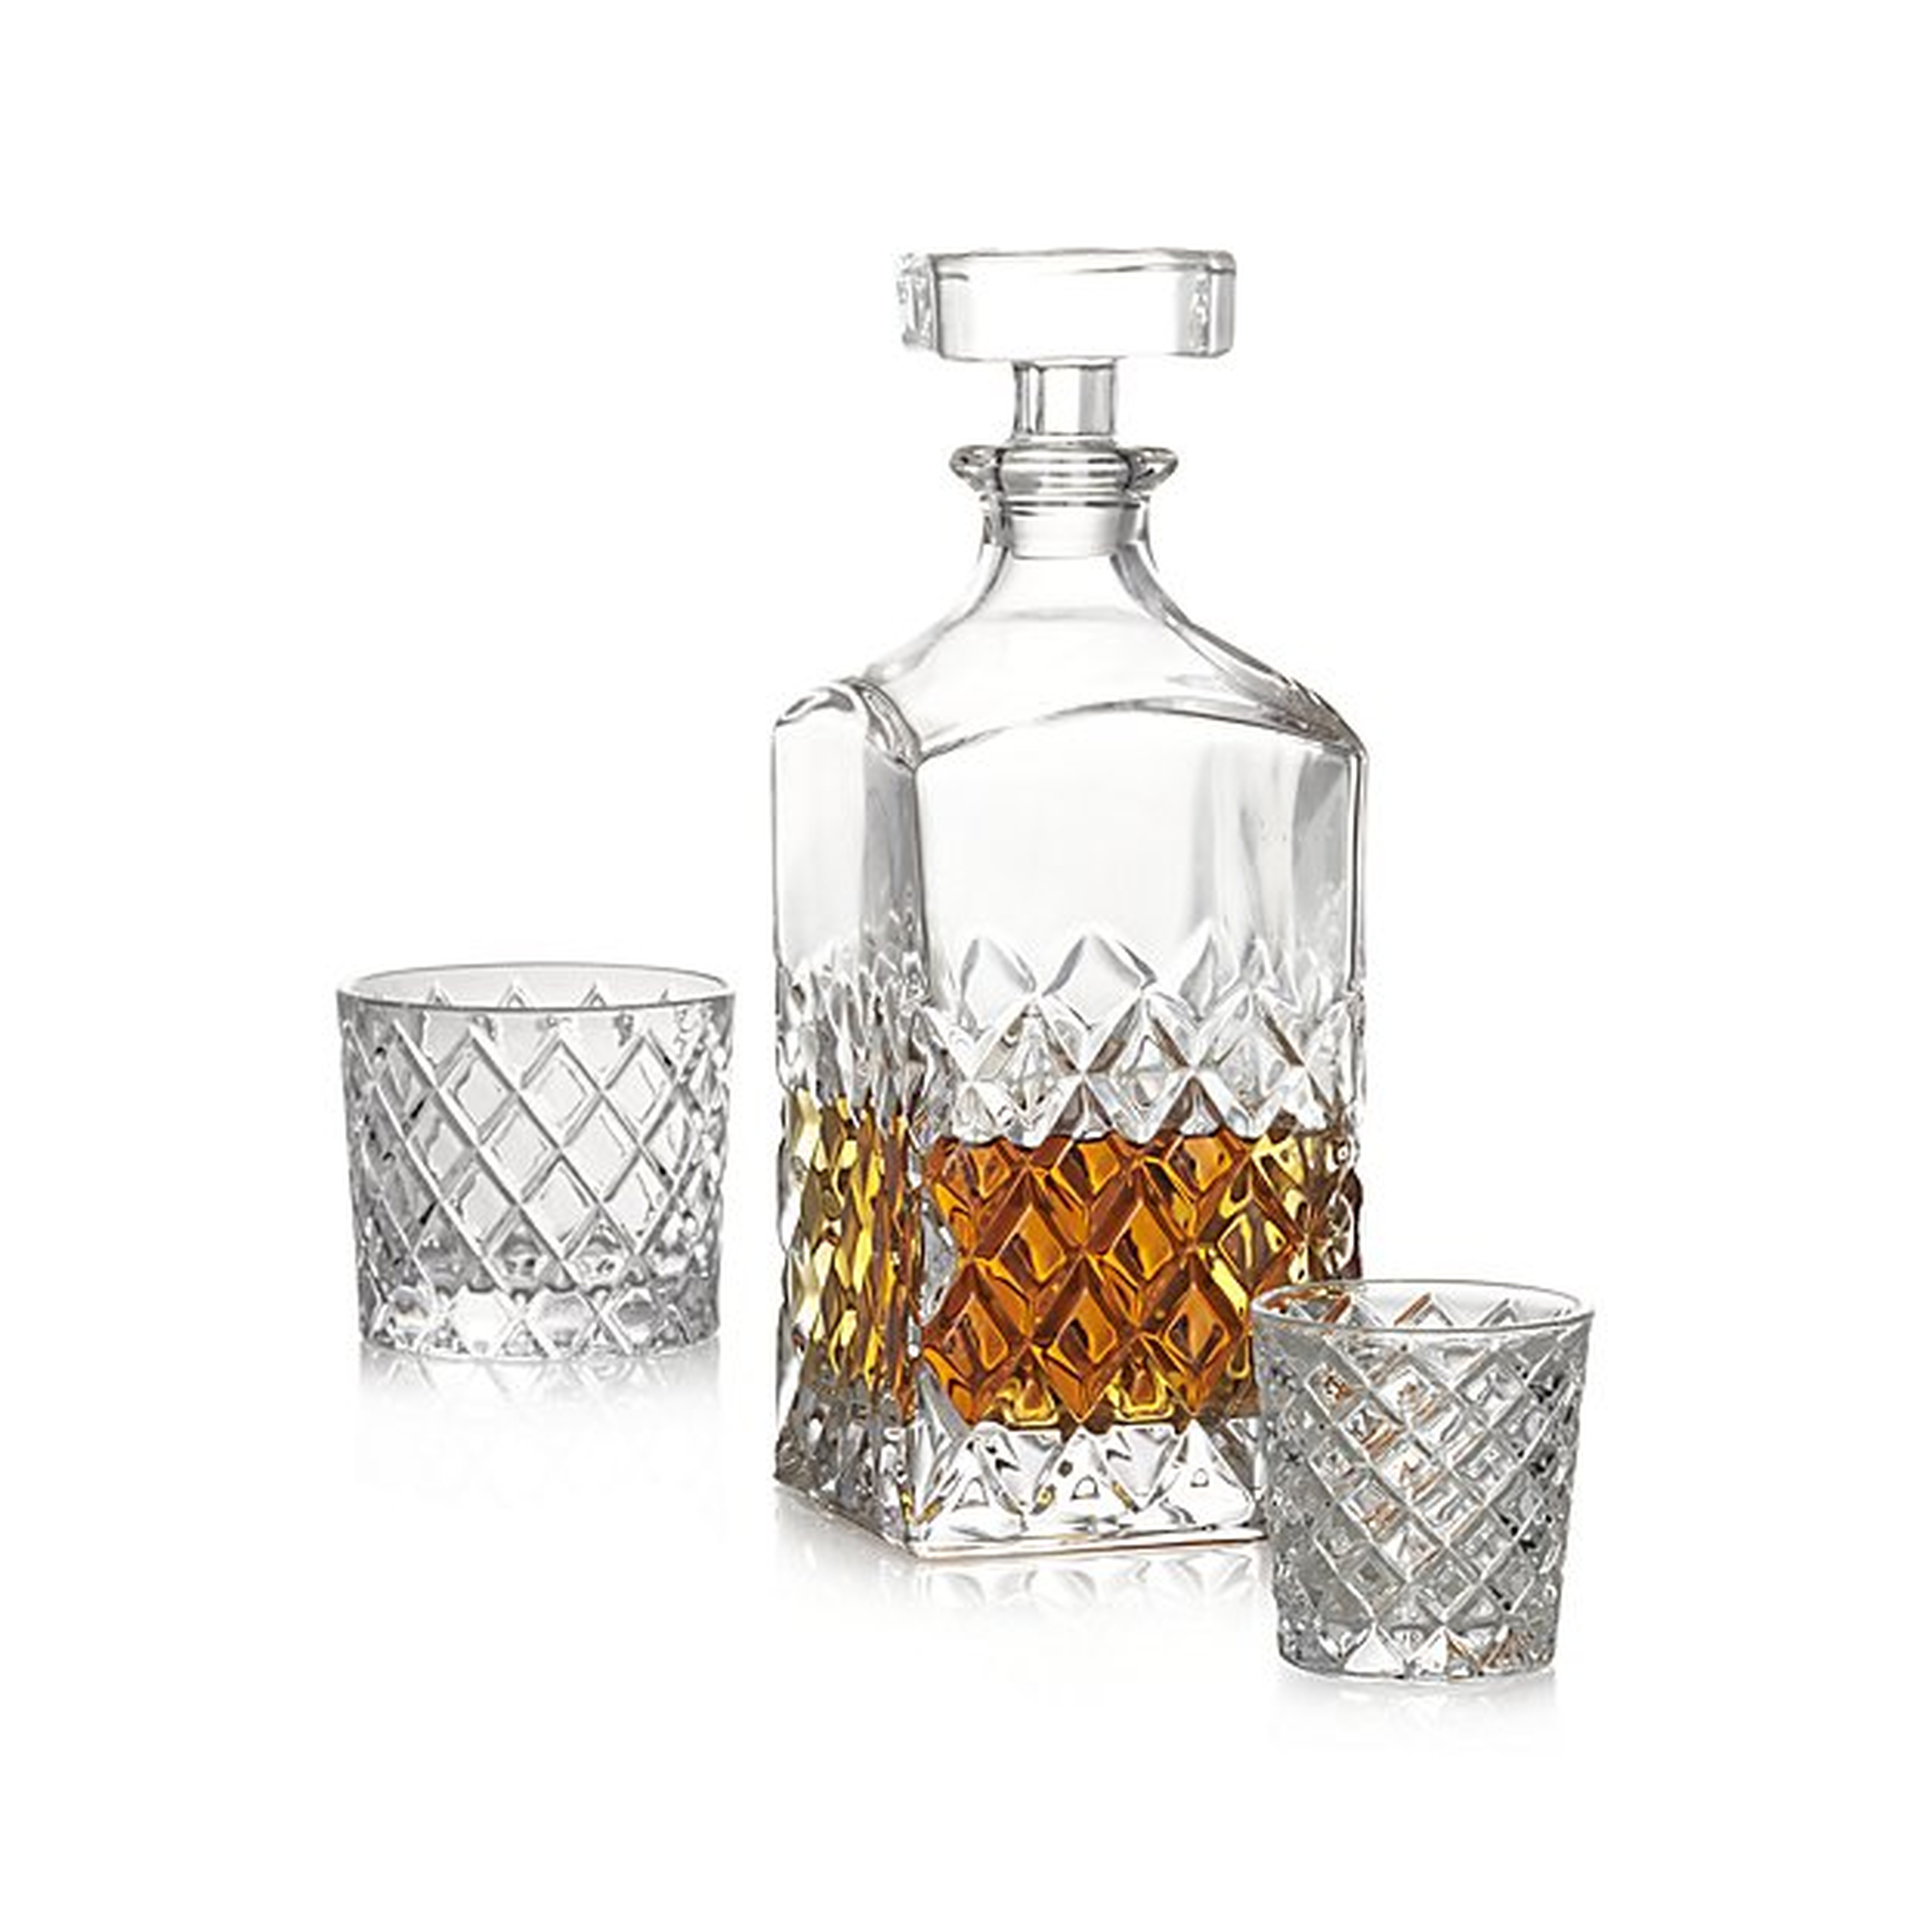 Hatch Decanter - Crate and Barrel